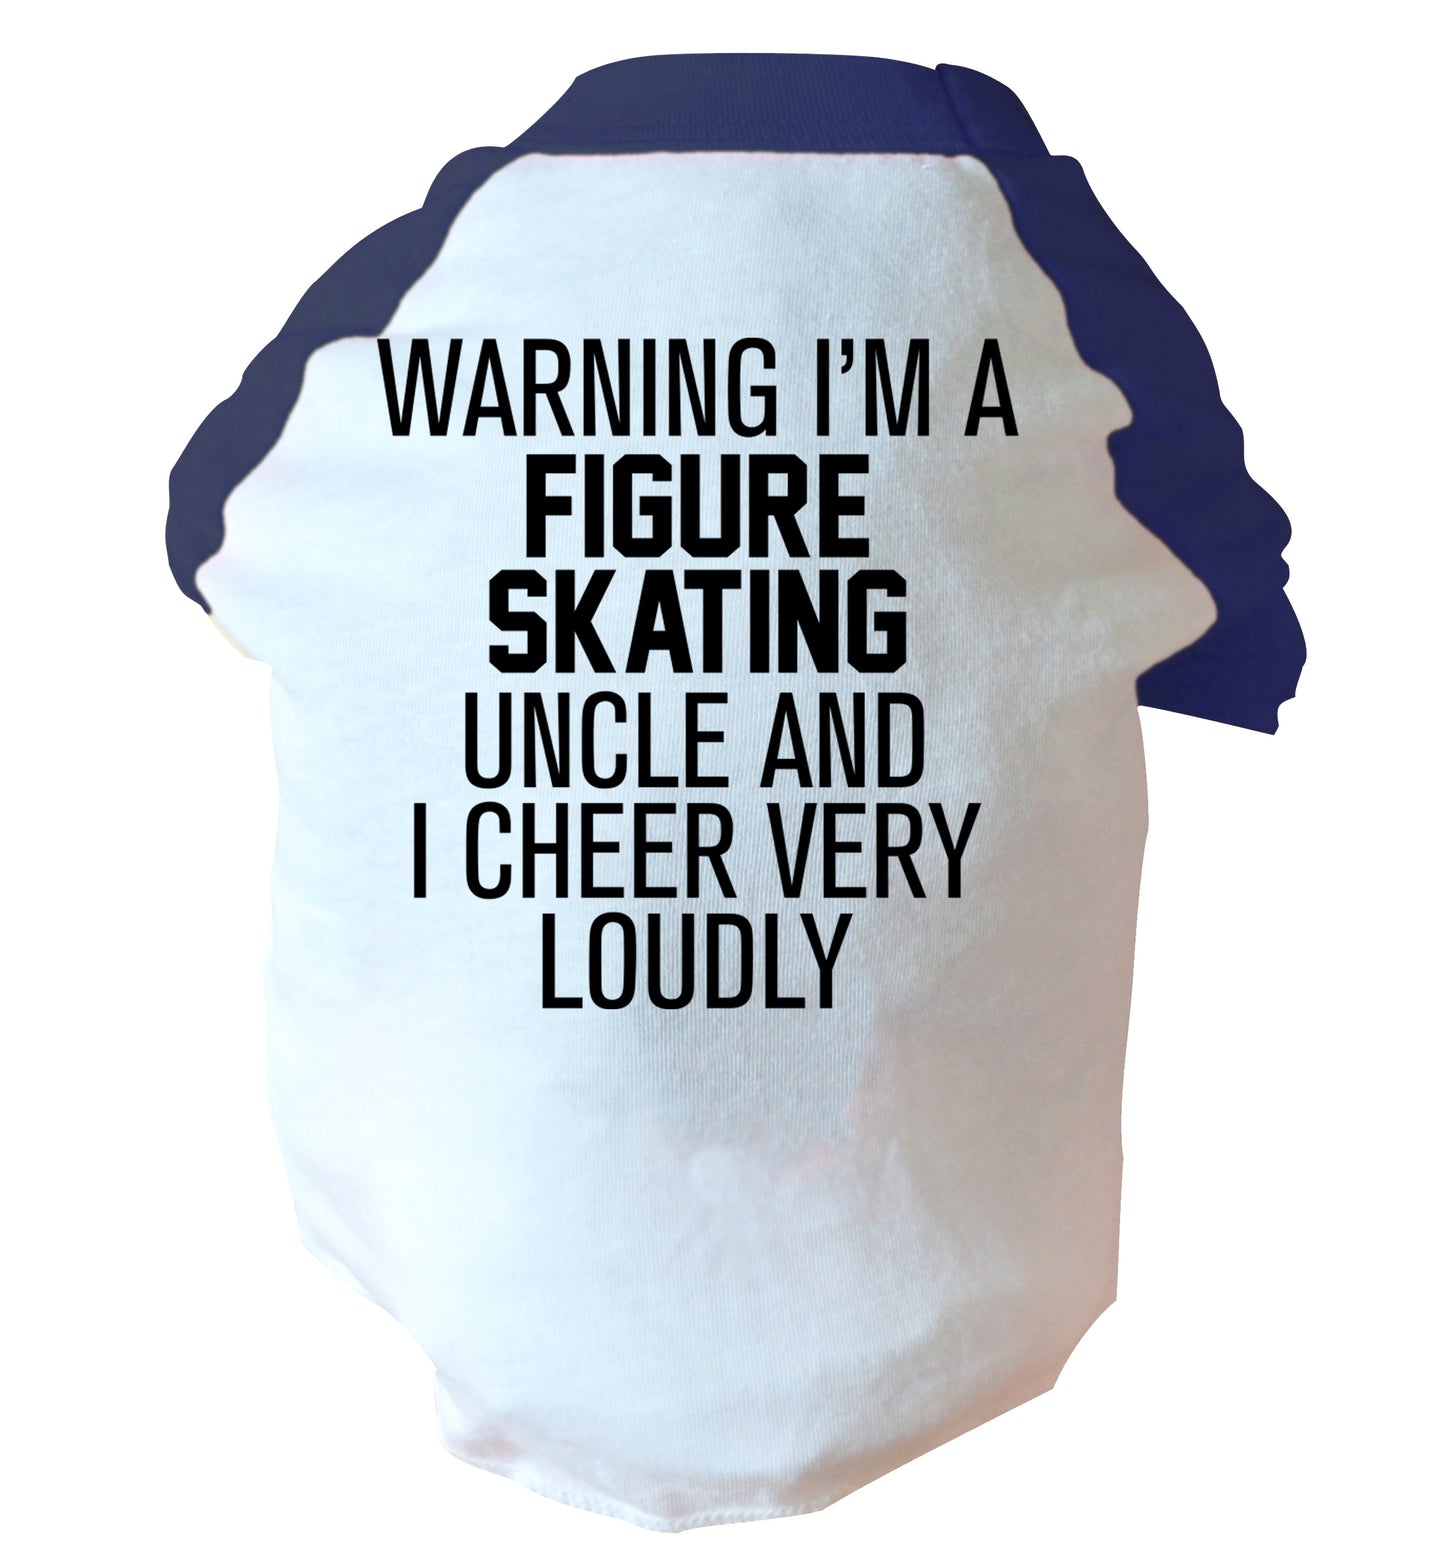 Warning I'm a figure skating uncle and I cheer very loudly large blue dog vest